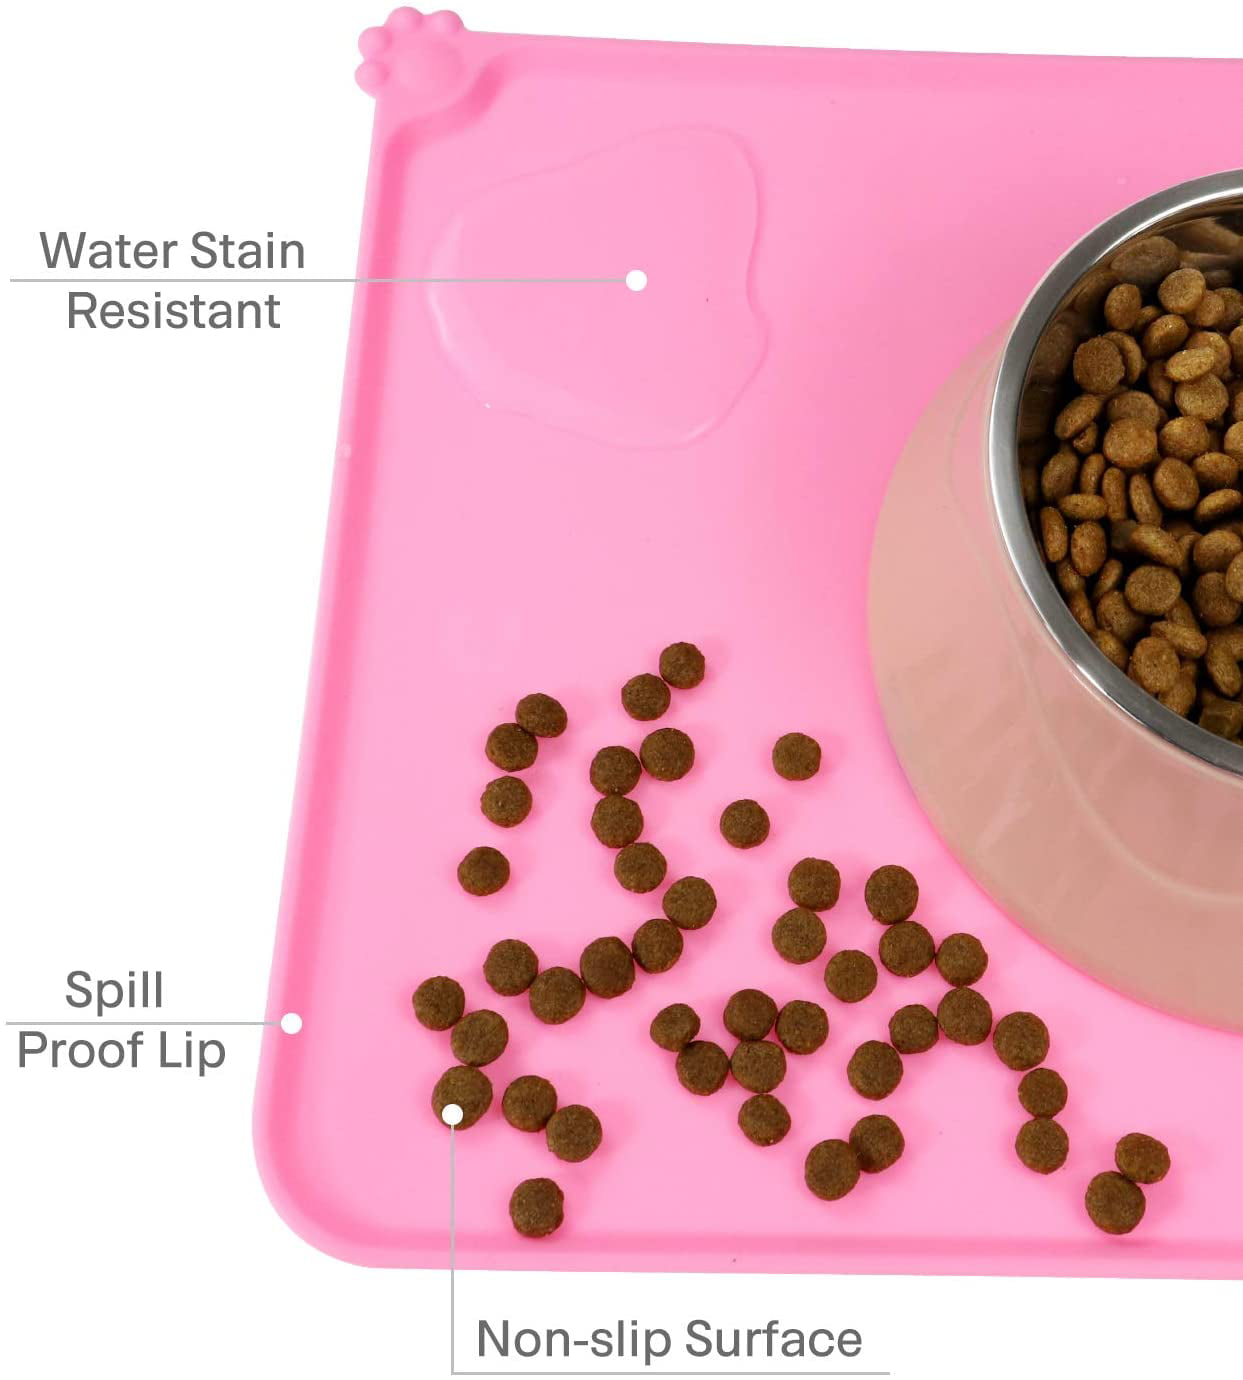 dog cat slow food feeding mat silicone pet products – Simply Gotta Pup